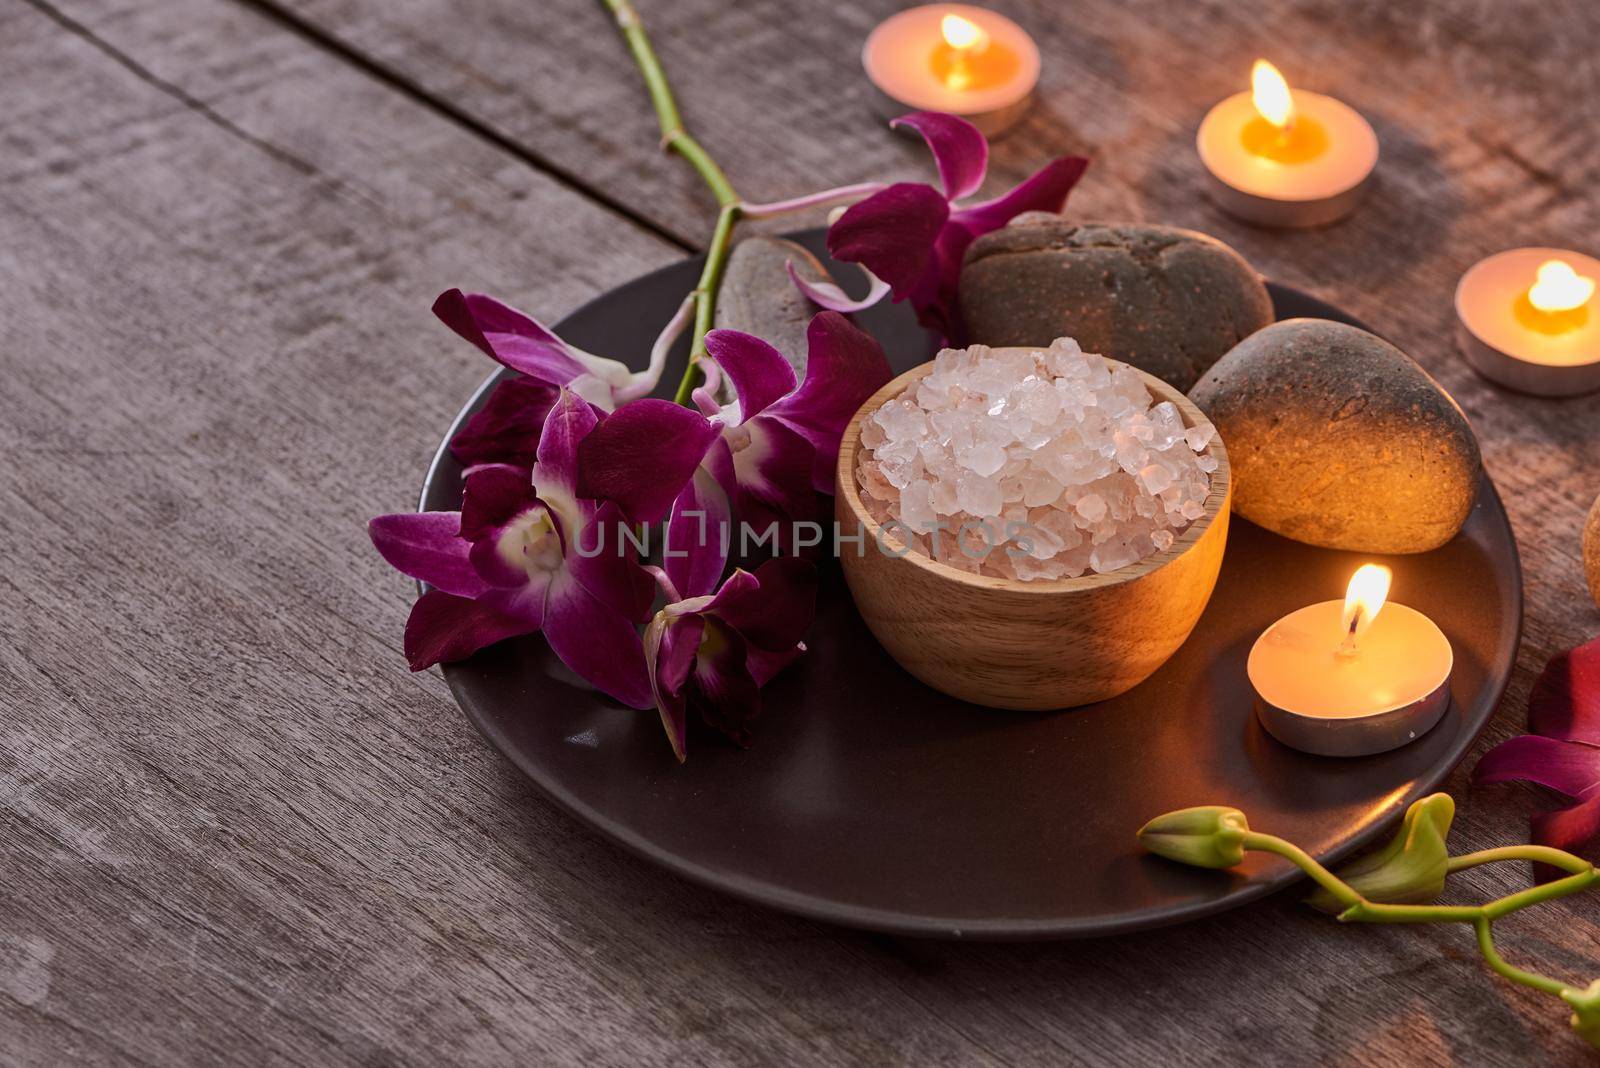  Spa setting and health care items on dark wooden background. Space for text